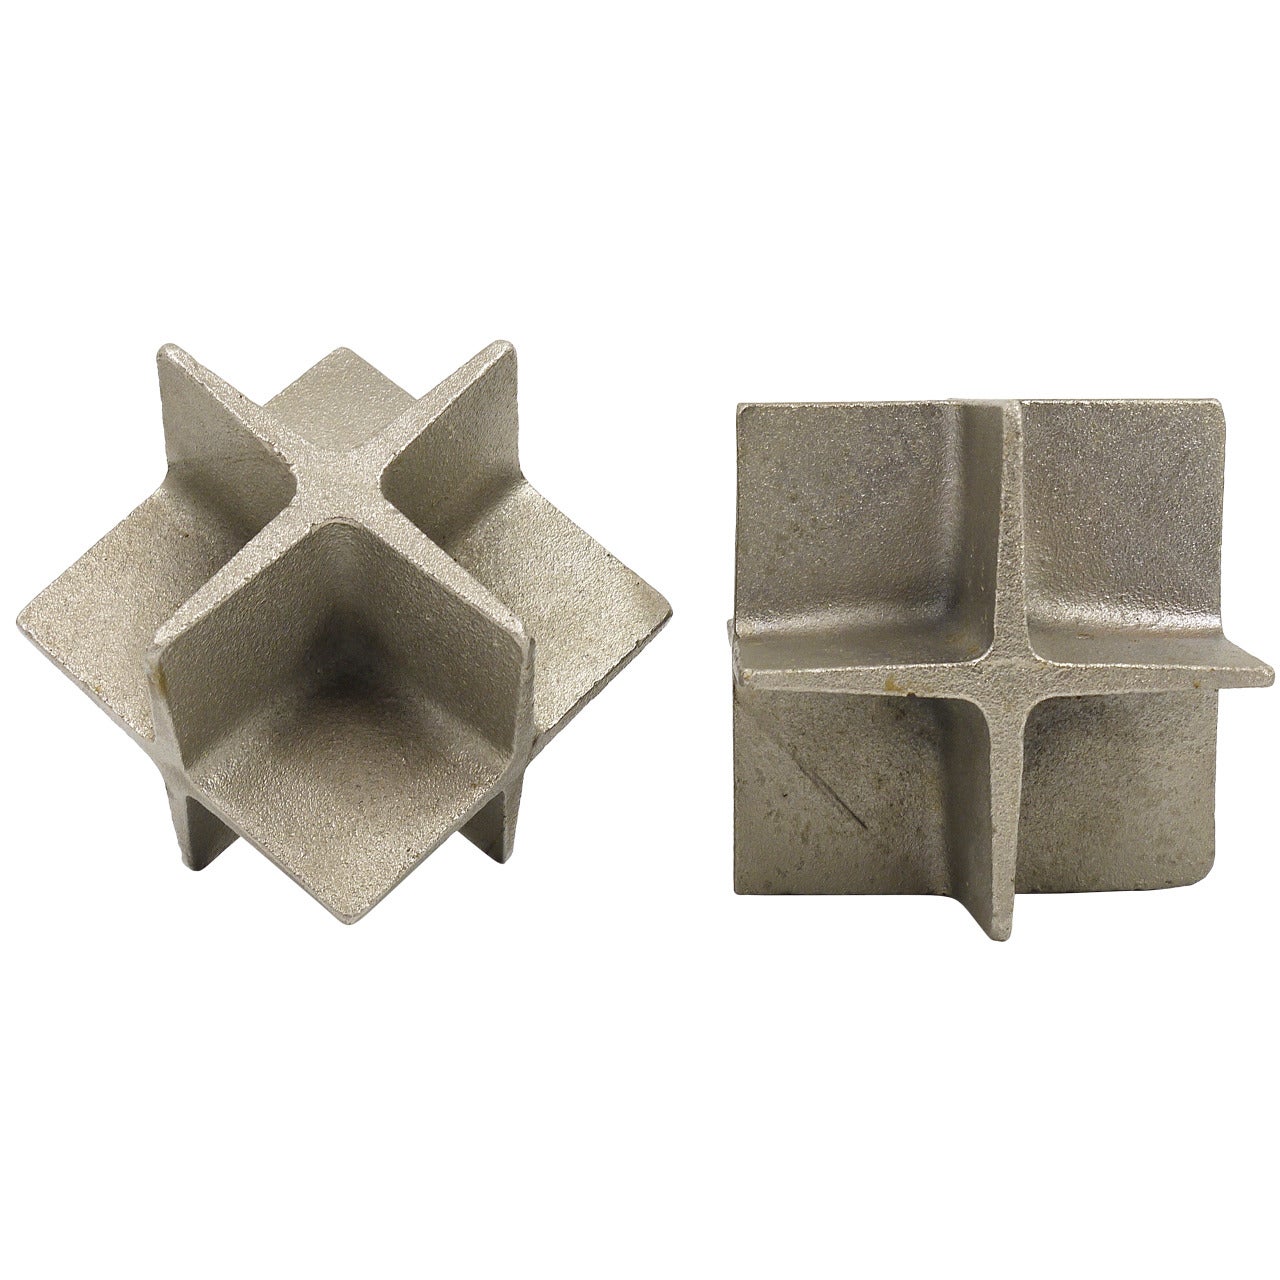 Carl Auböck Mid-Century Cube Nickel-Plated and Cast Iron Bookends, Austria